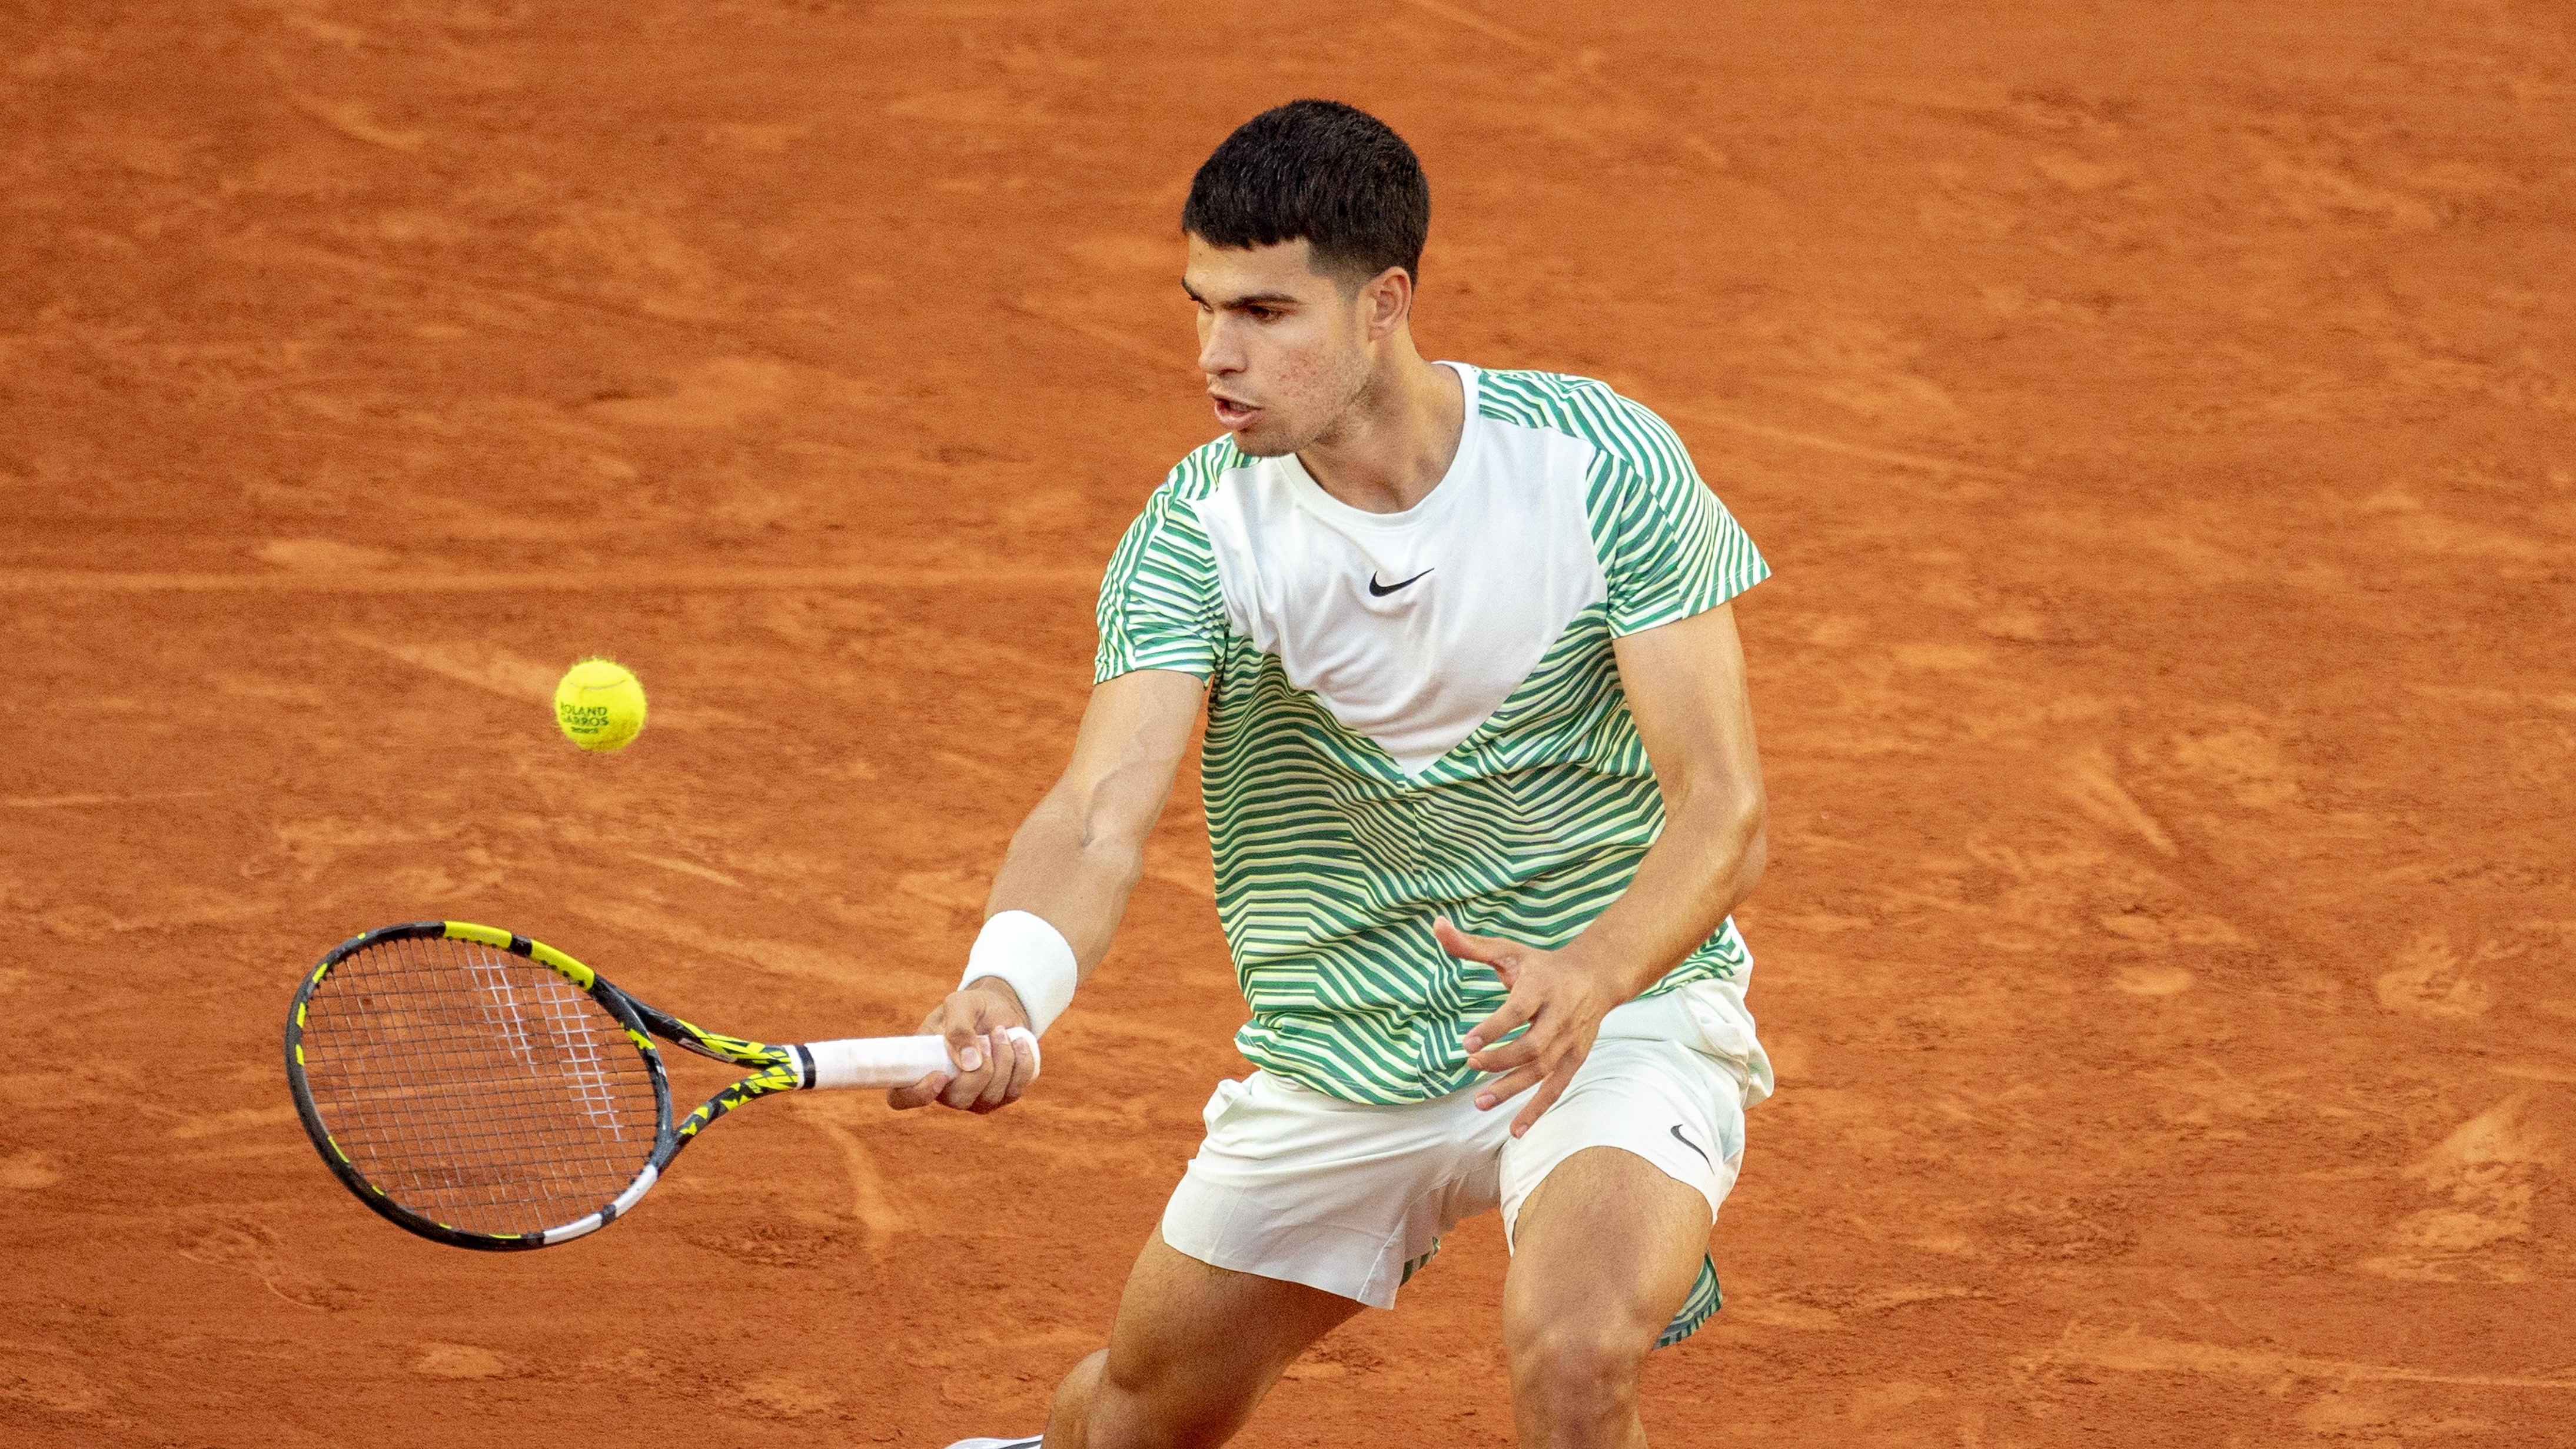 Alcaraz vs Tsitsipas live stream how to watch French Open quarter-final for free online from anywhere TechRadar